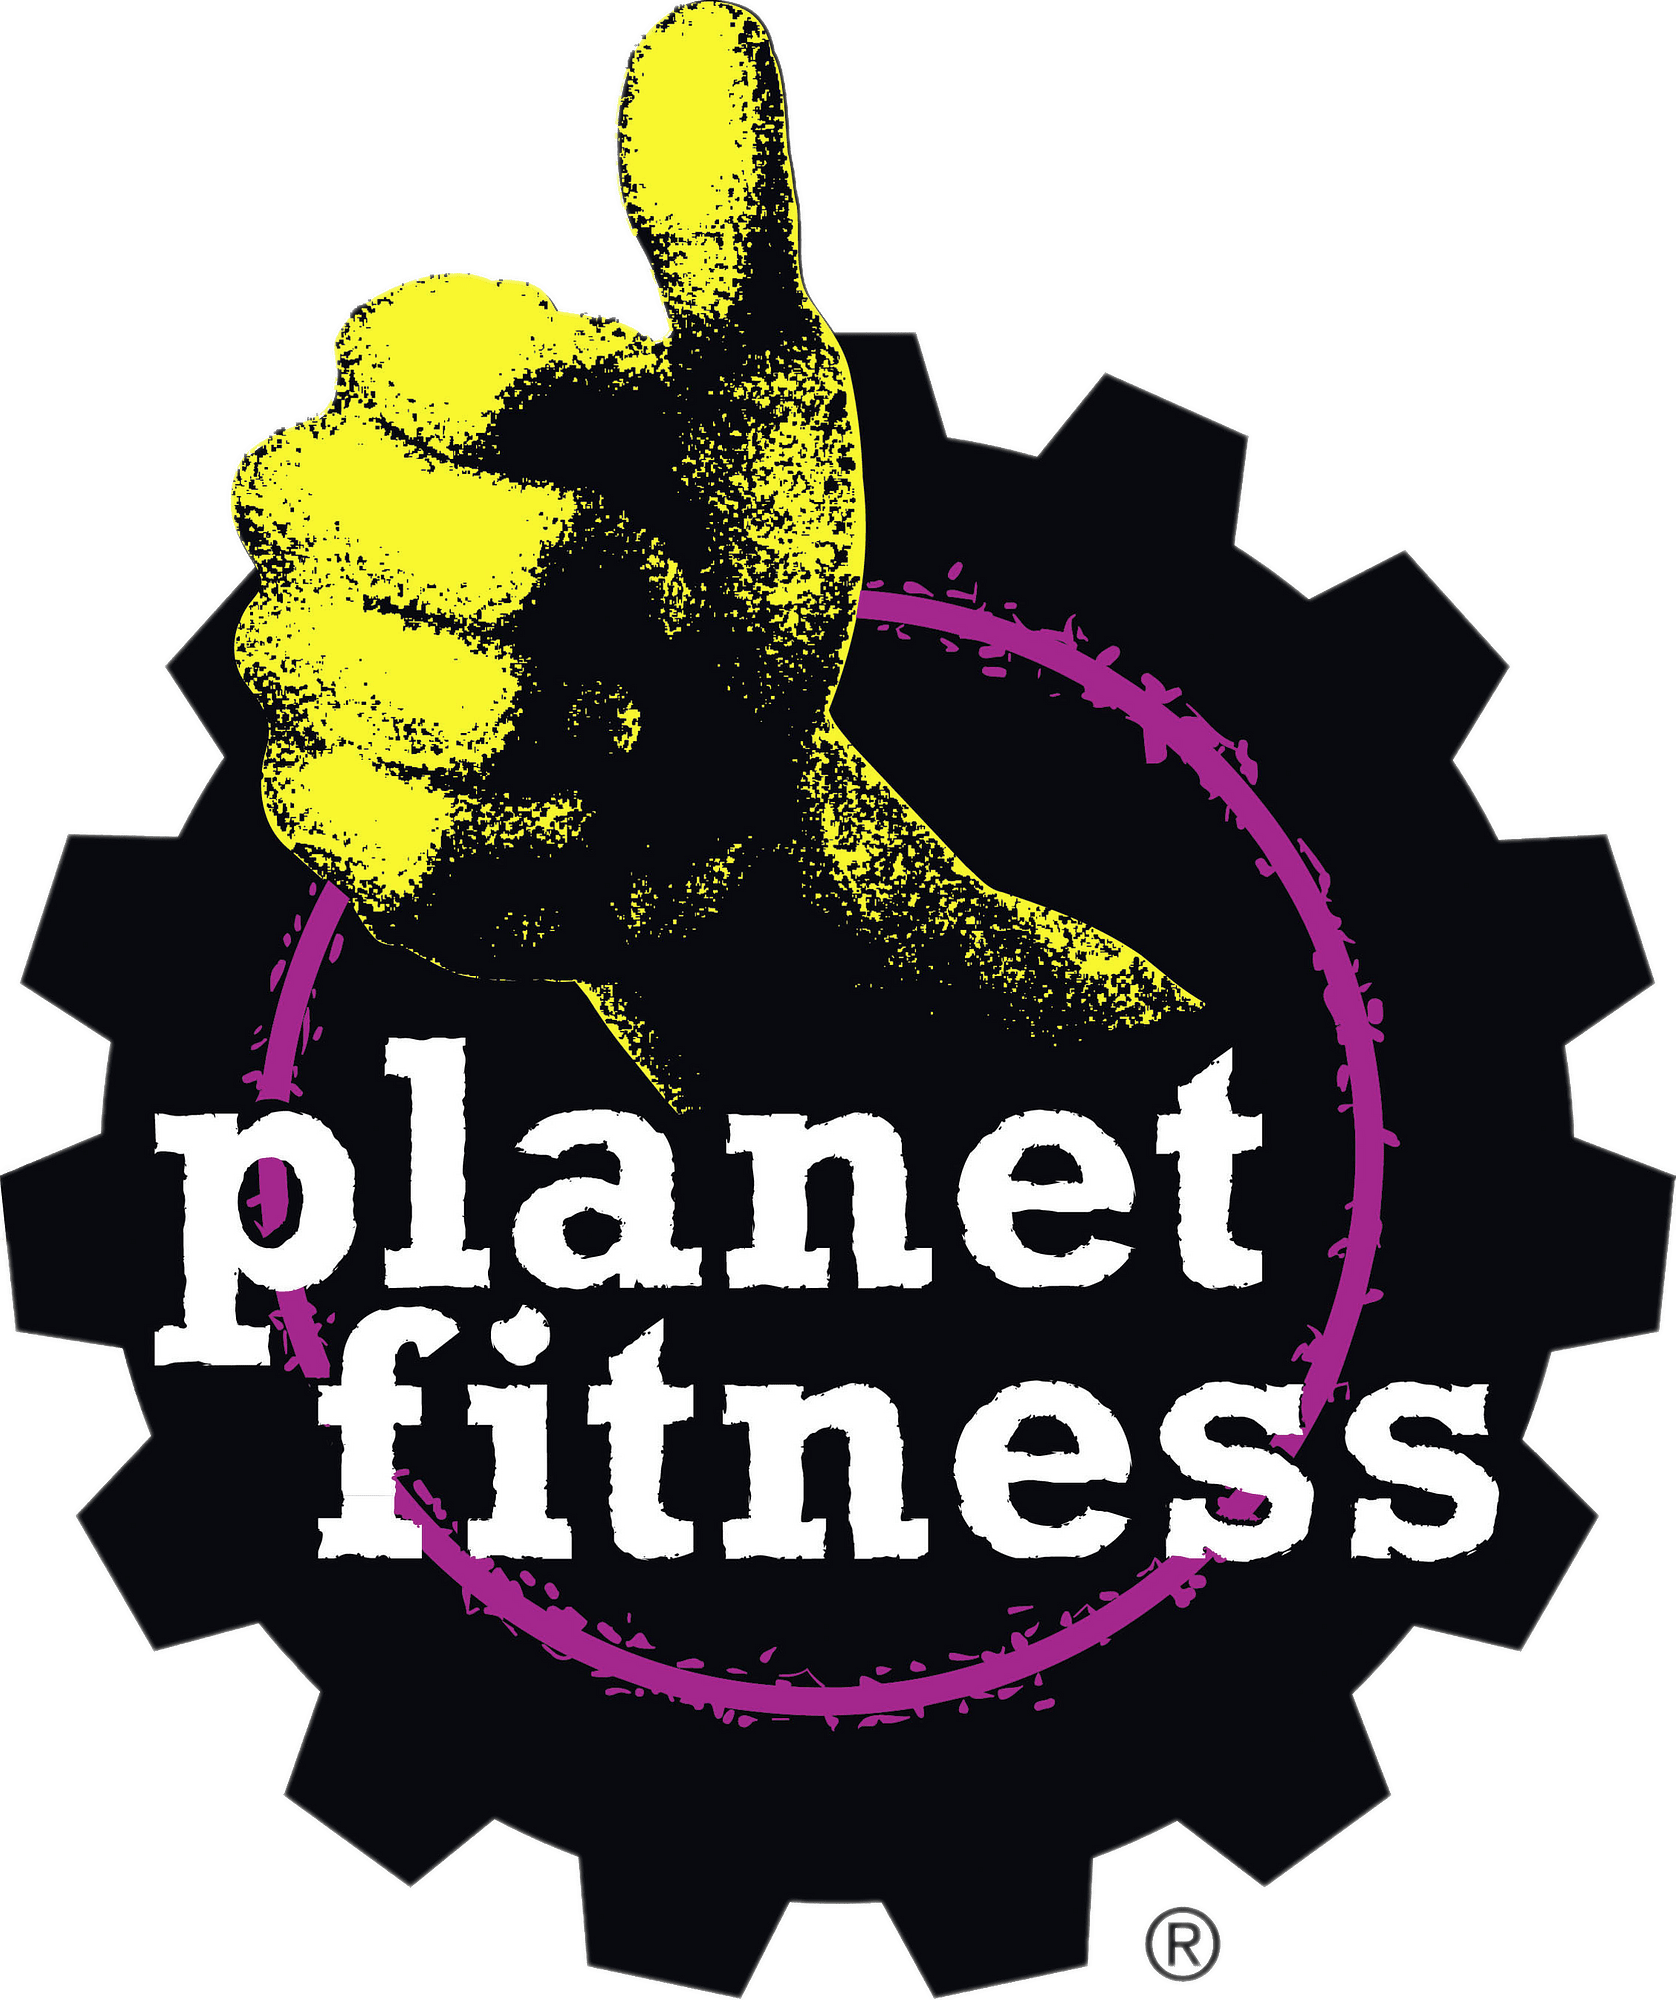 PLANET FITNESS - Refer a Friend & Let Them Join For $1 Down